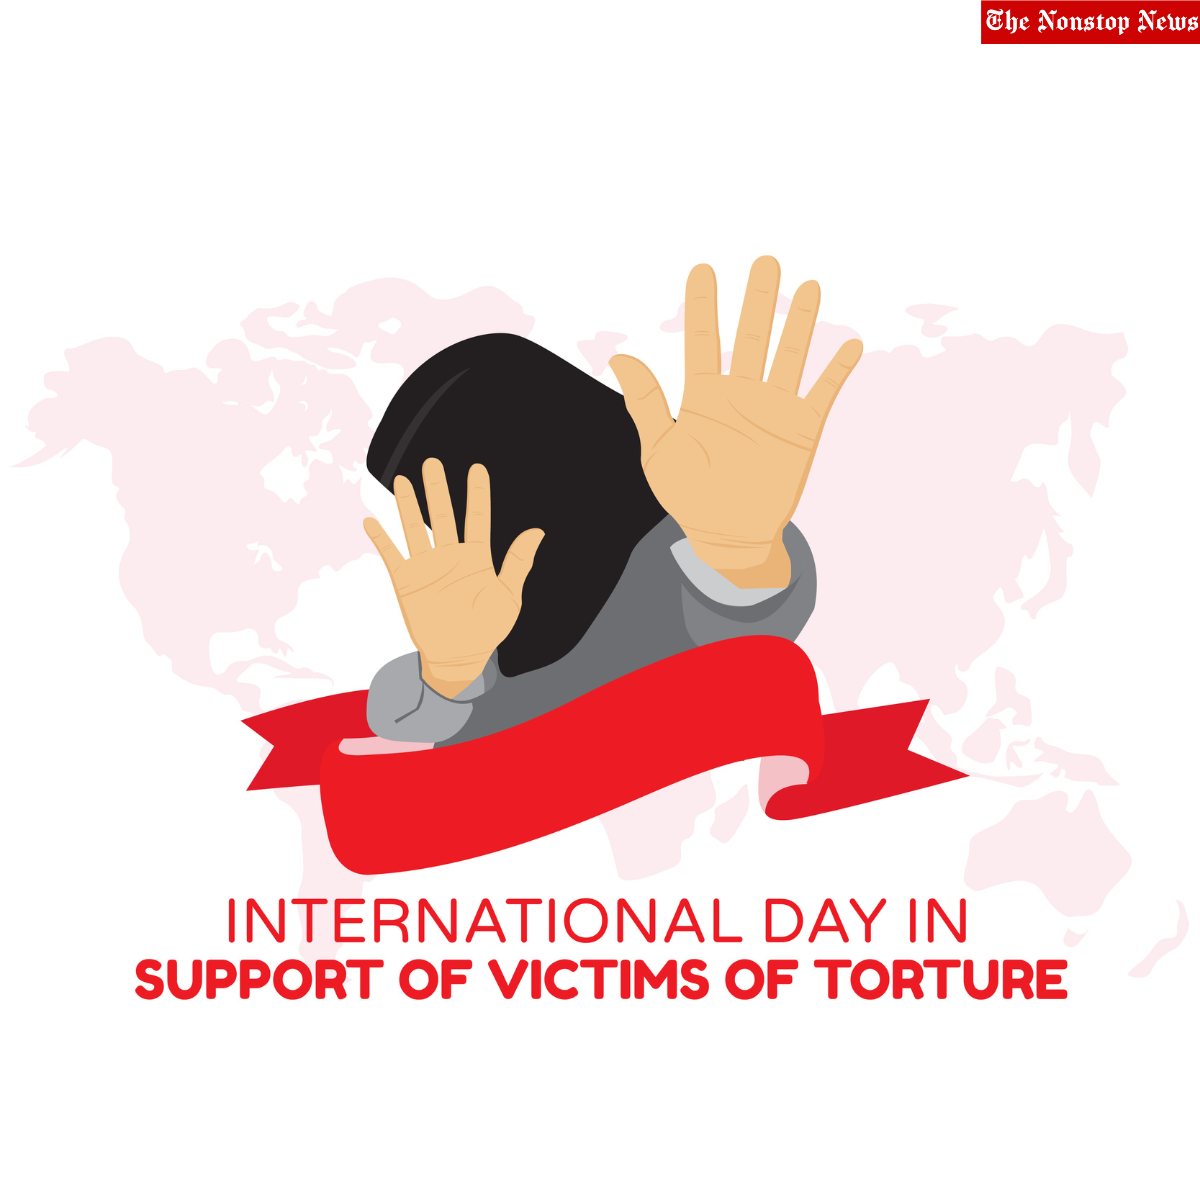 International Day in Support of Victims of Torture 2022: Theme, Quotes, Images, Slogans, Posters